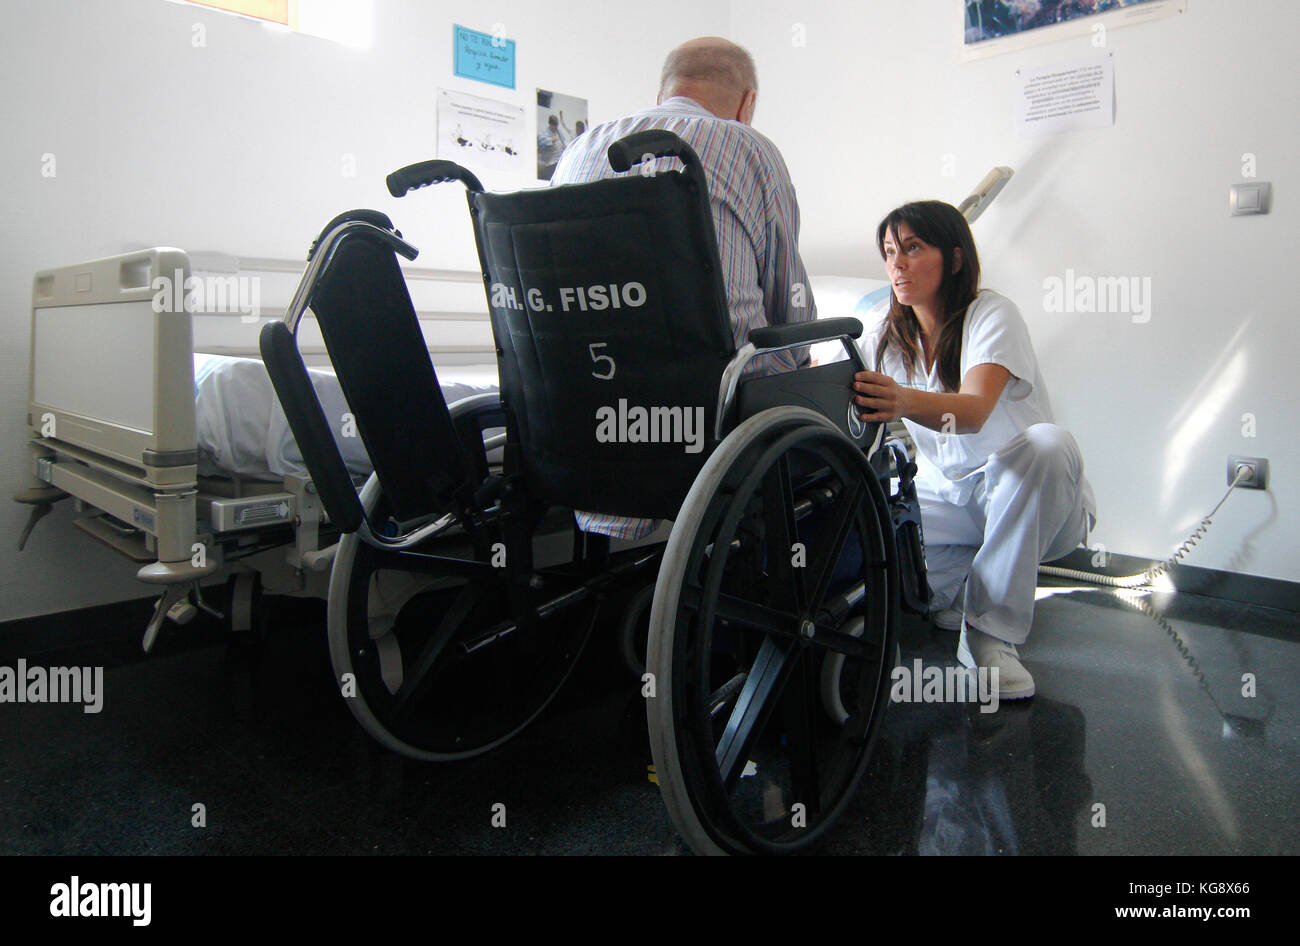 Patients who have suffered a stroke perform recovery activities with the help of nurses at the General Hospital of Palma in Mallorca, Balearic Islands Stock Photo